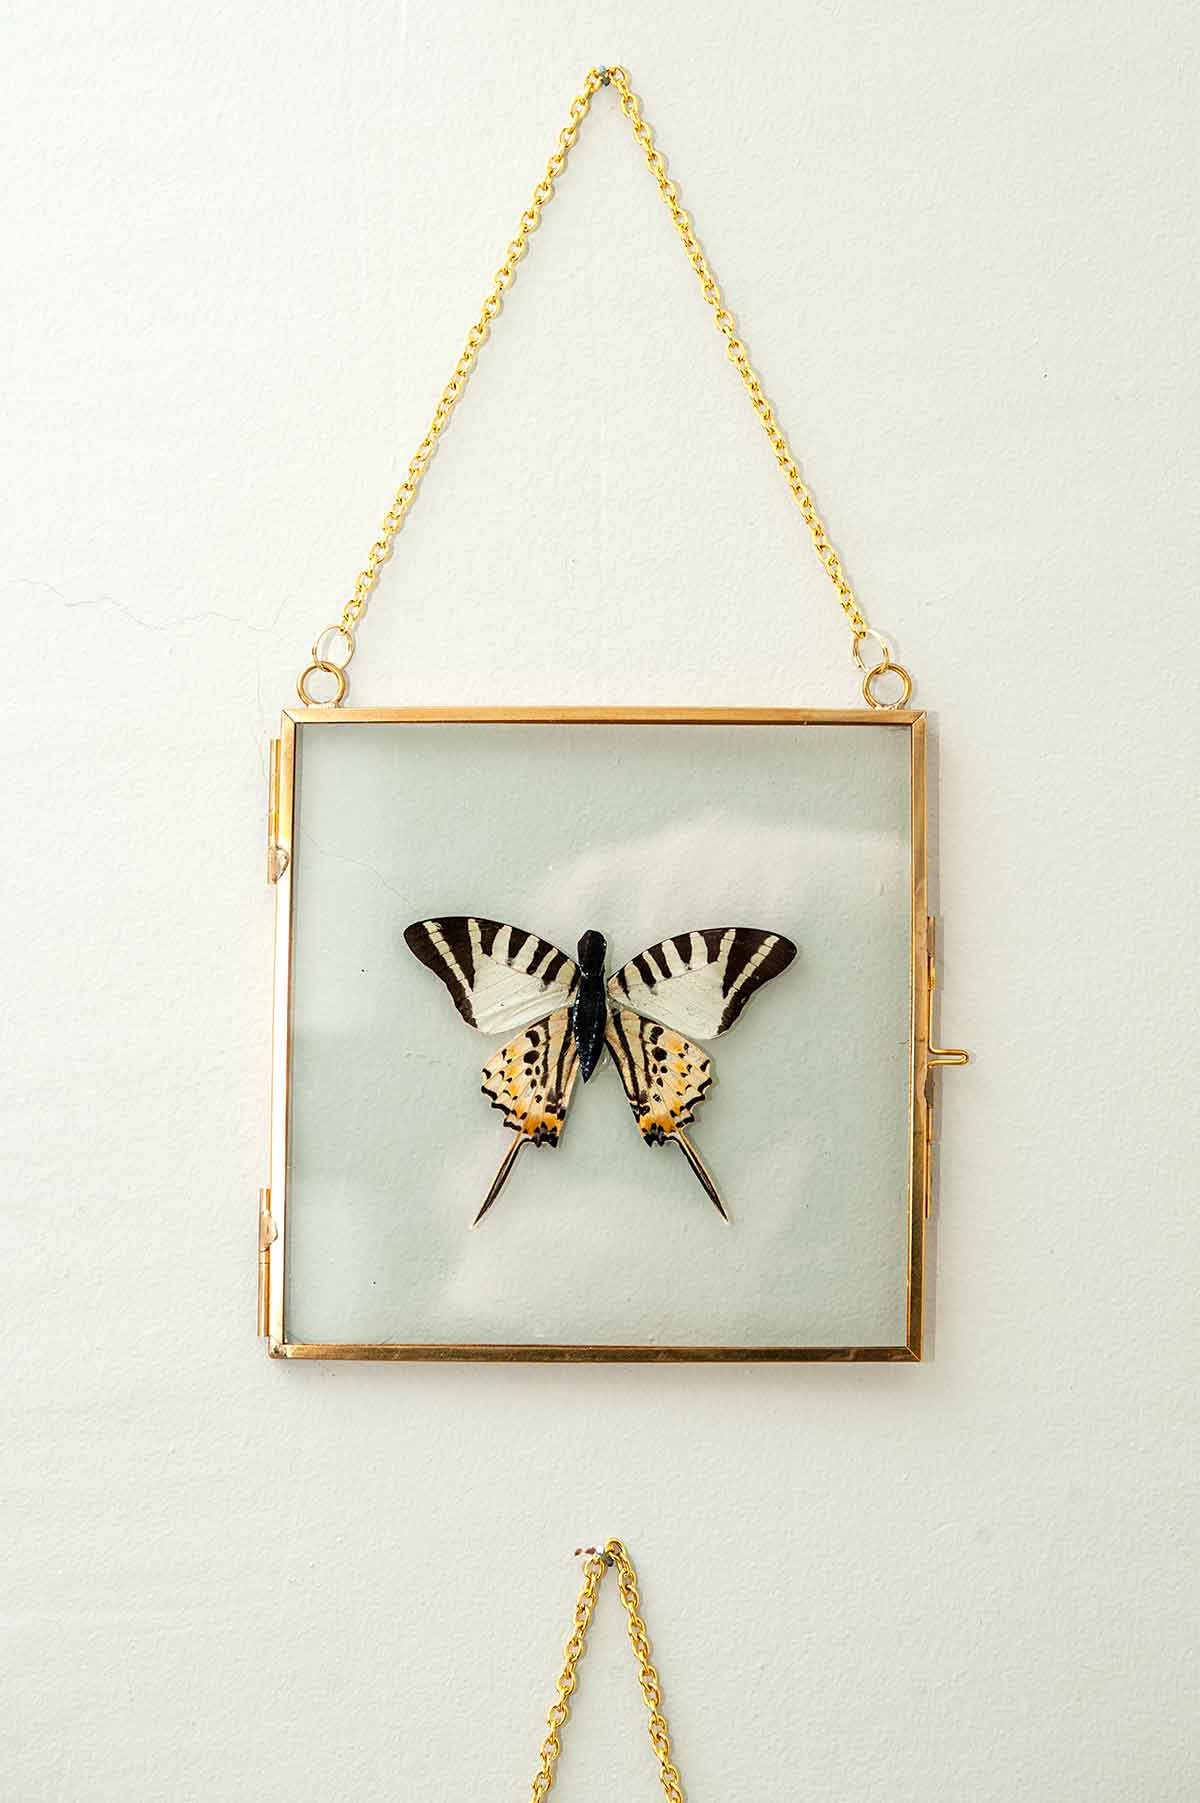 A clear frame with a butterfly on a wall.